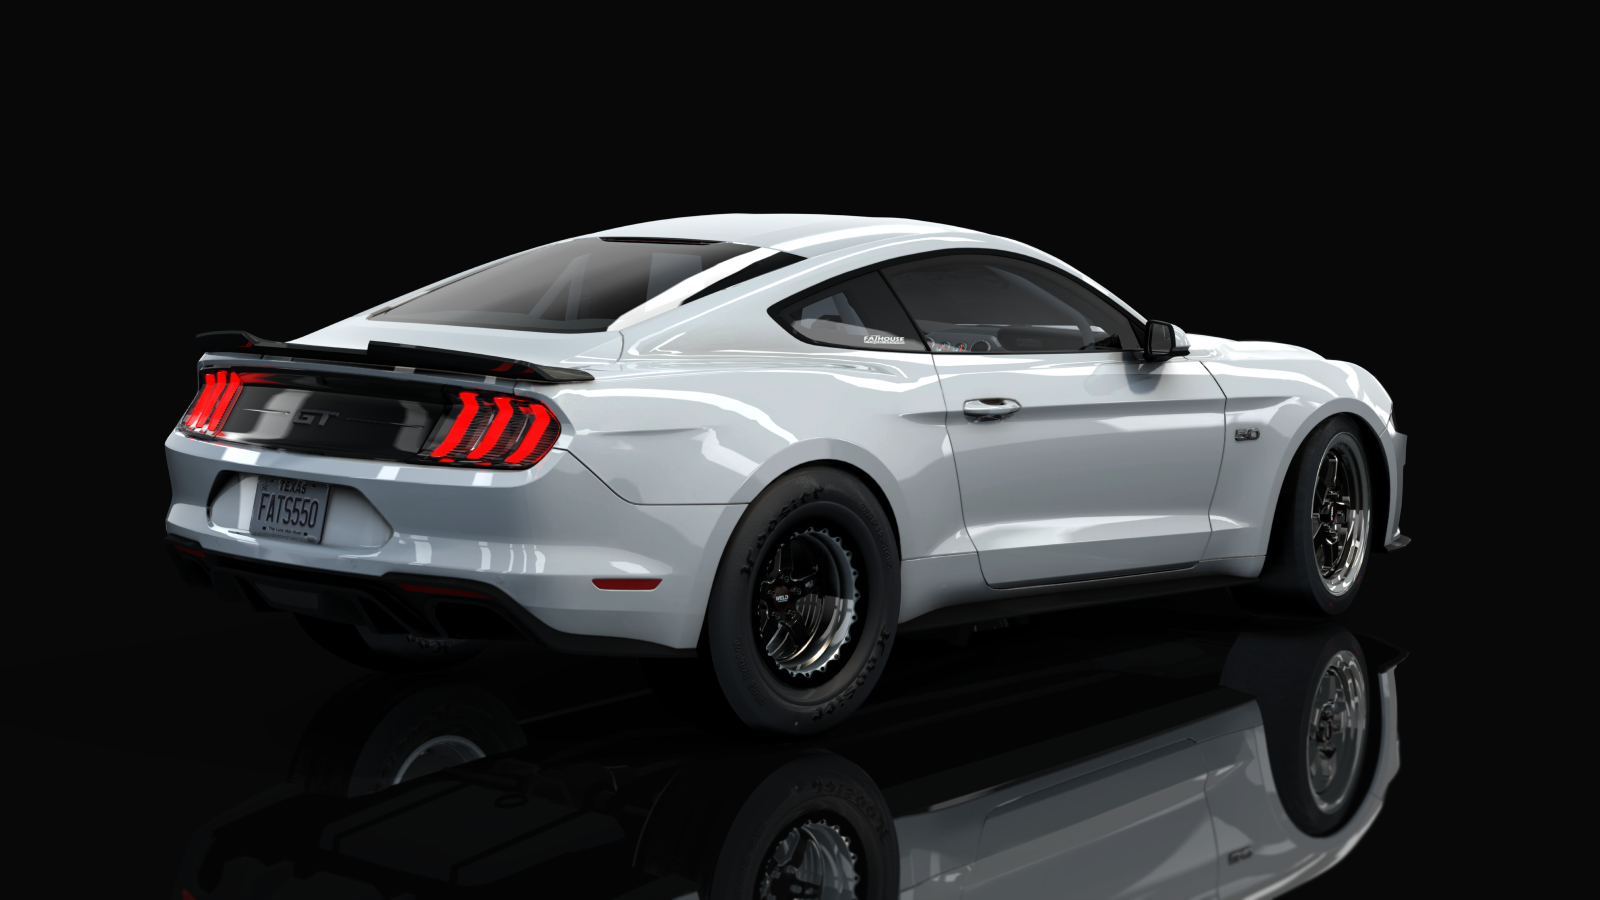 Ford Mustang GT 2018 1500Rx, skin Fathouse Performance